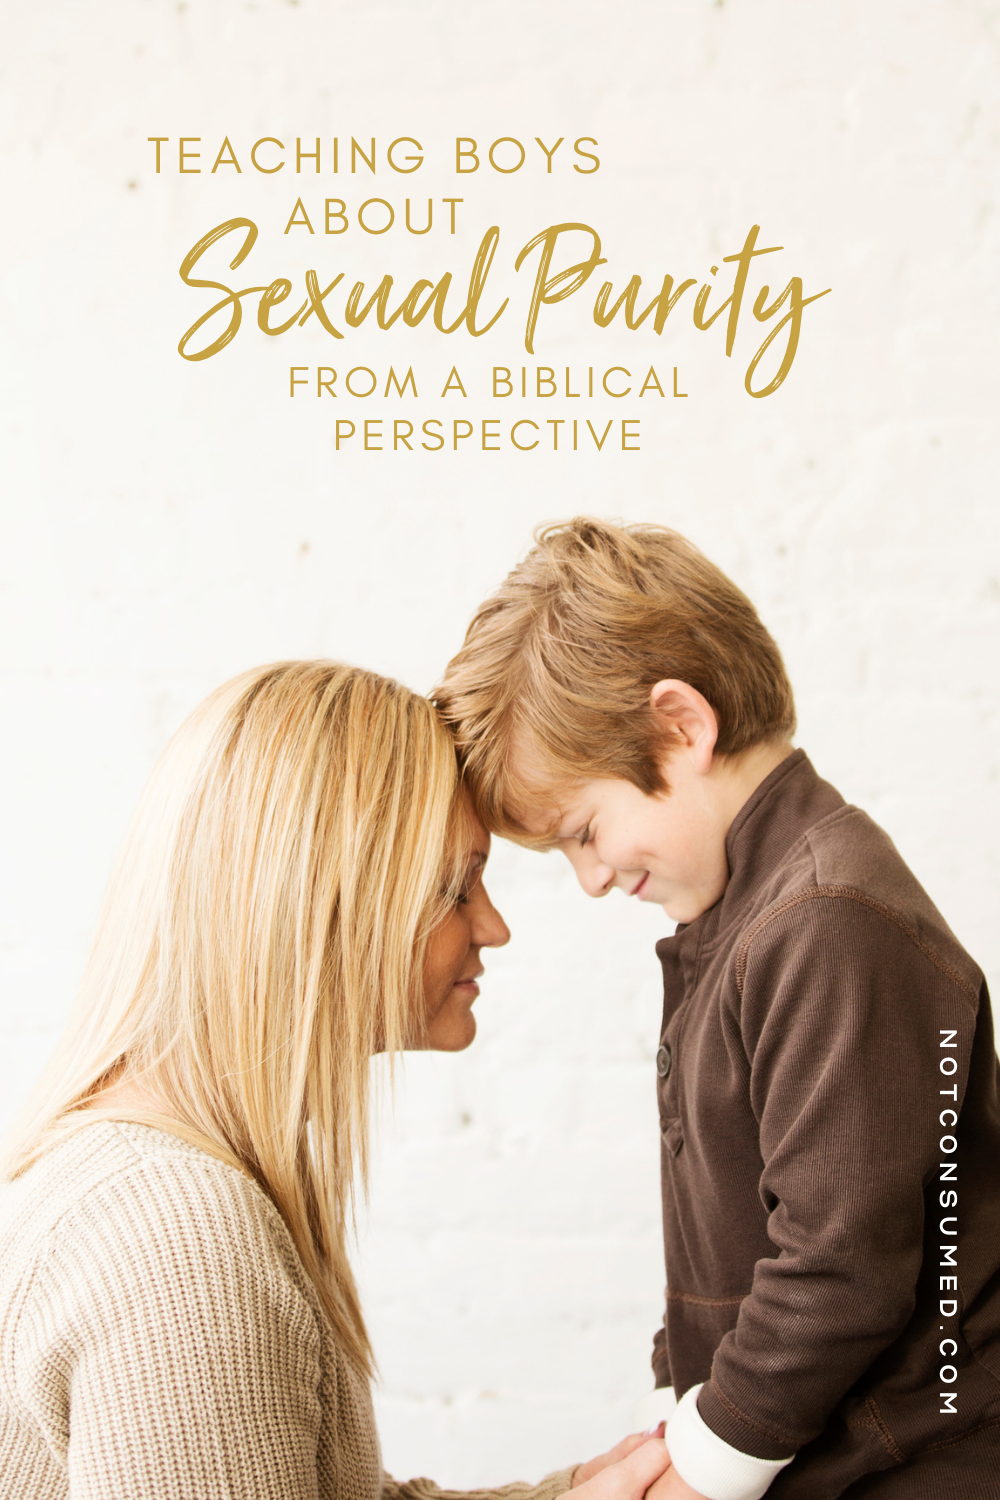 Sexual purity